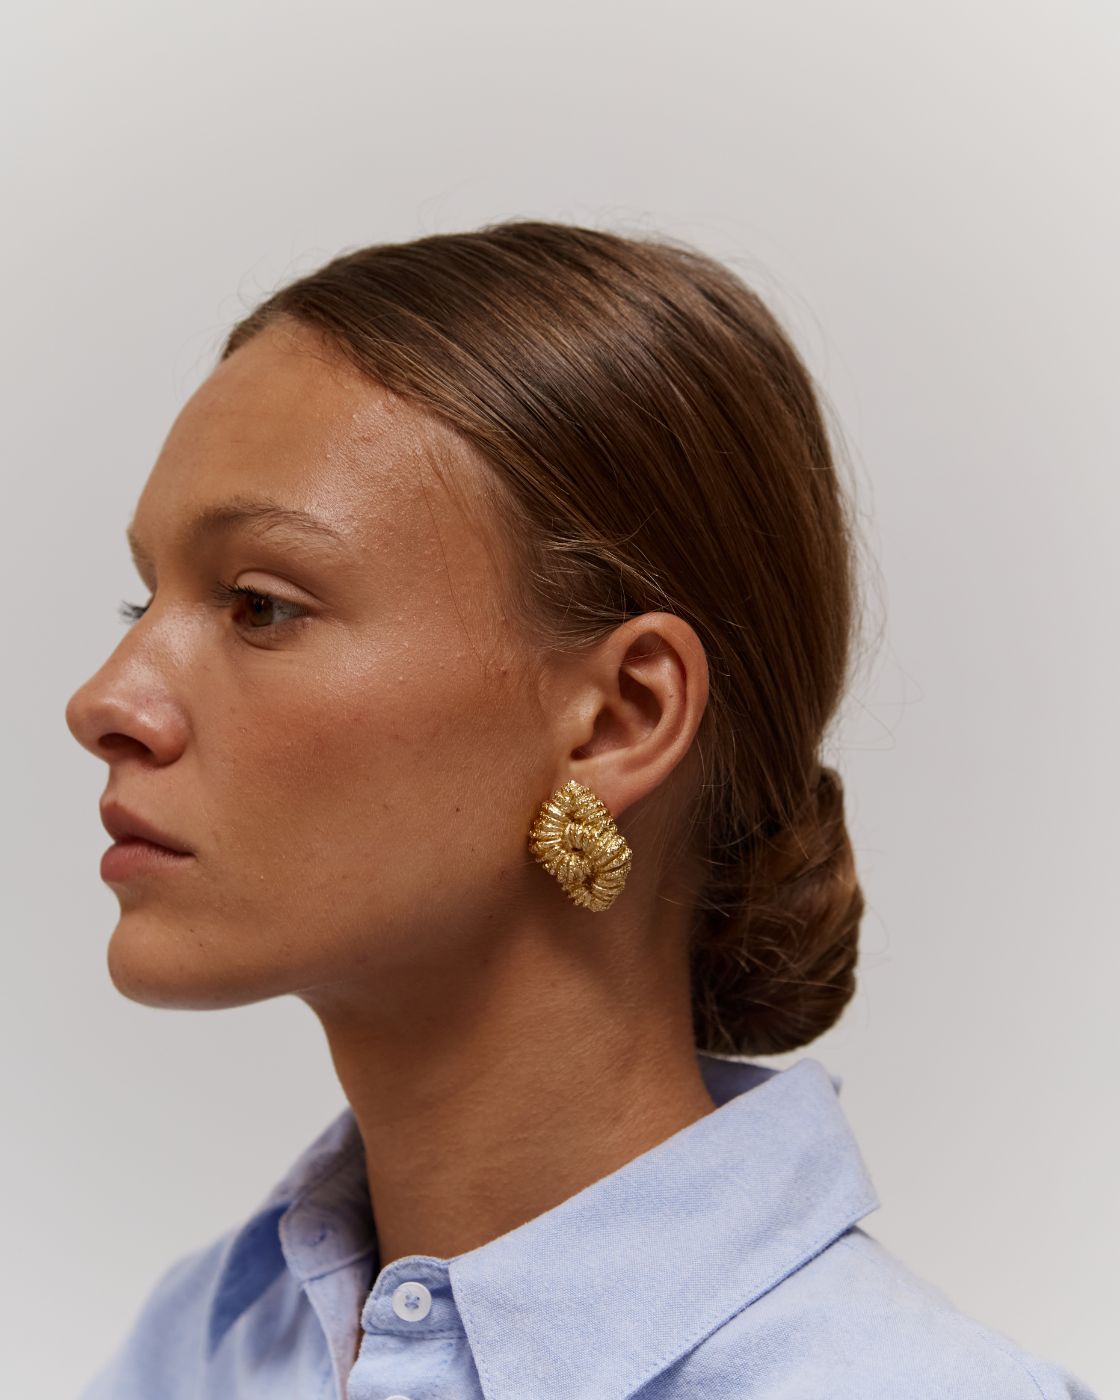 Loto Textured Gold Earrings